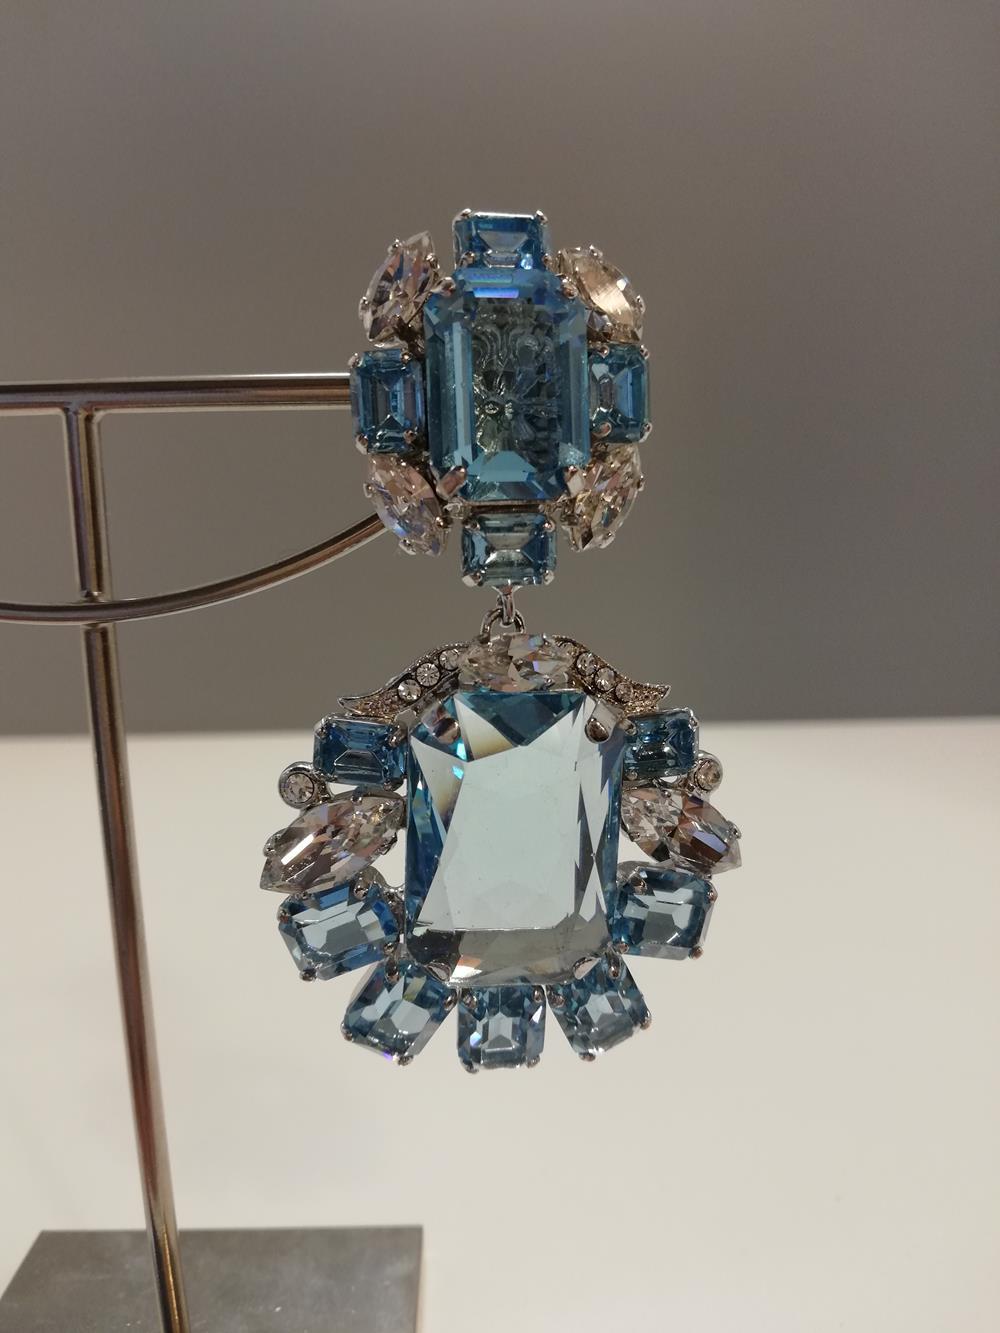 Beautiful earrings by Carlo Zini
Non allergenic rhodium
Amazing combinations of aquamarine like crystals 
Clip on closure, pierced on request
Length cm 7 (2.75 inches)
100% Artisanal work, made in Milan
Worldwide express shipping included in the